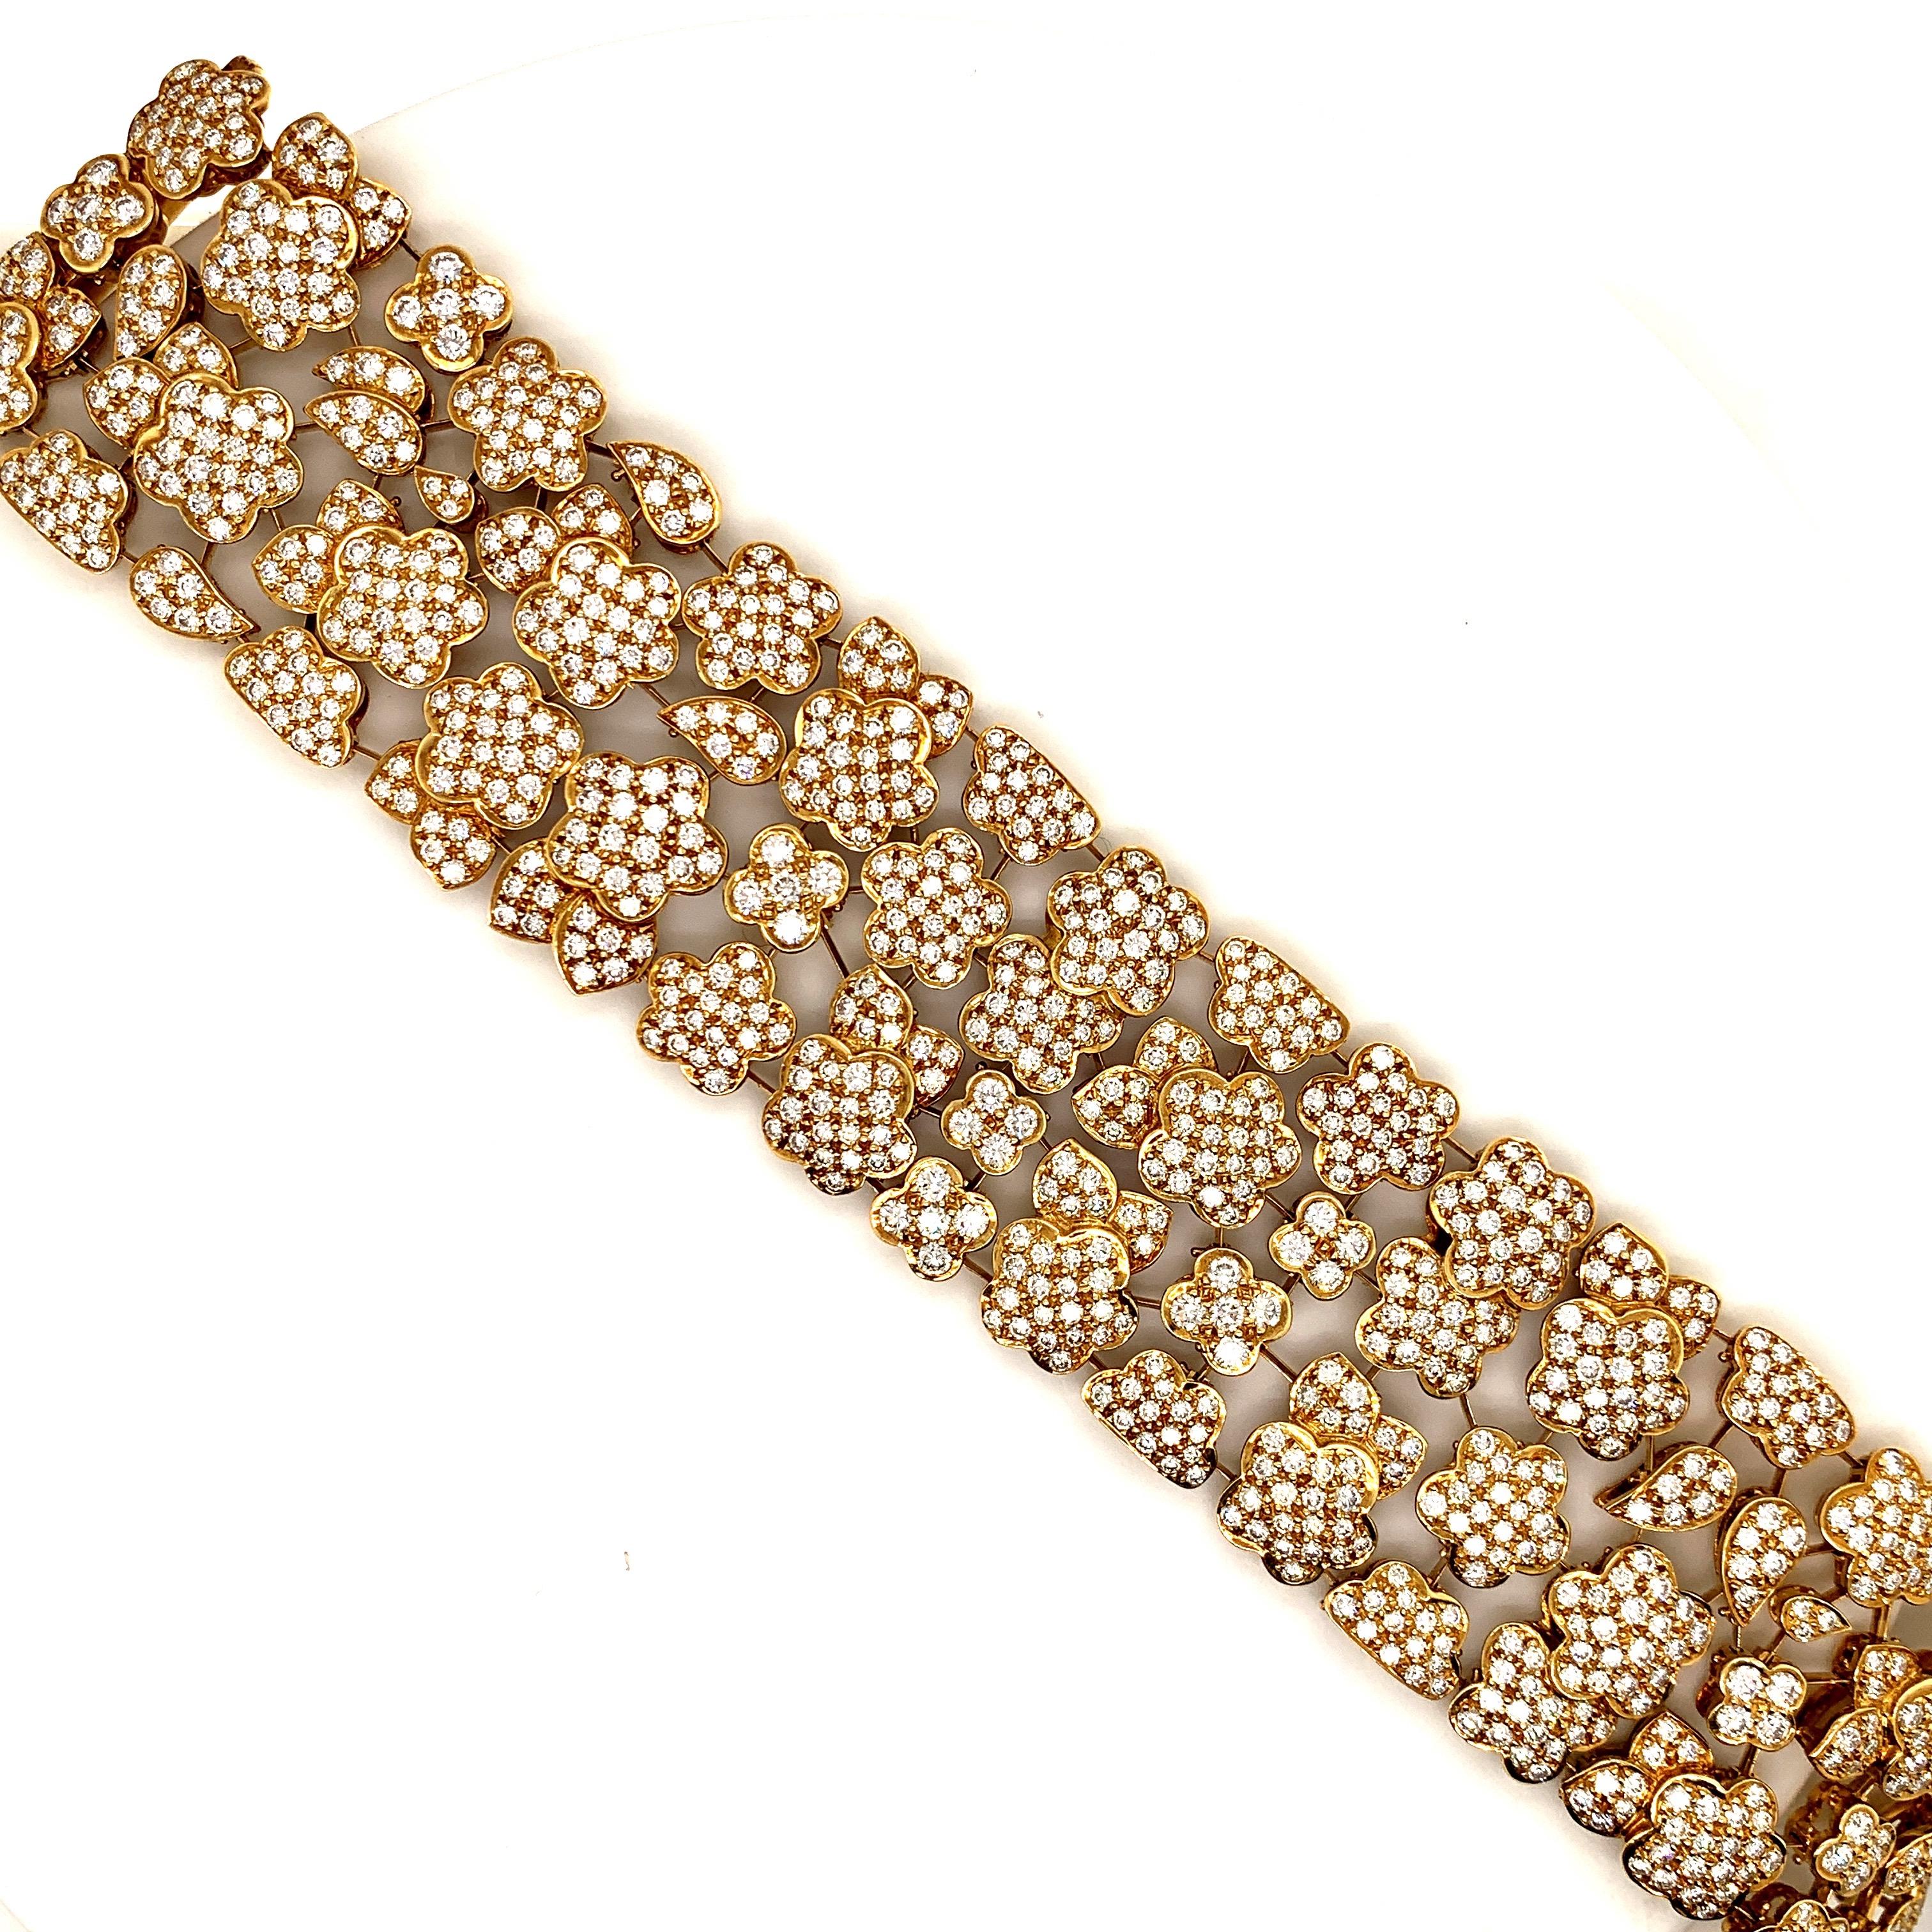 Van Cleef and Arpels 
Diamond and Gold Bracelet.
This very rare VCA bracelet is in remarkably pristine condition. .
Showing off the stunning artistry of the master jewelers craft as only Van Cleef can do .
Elegance with a flourish .
Encompassing